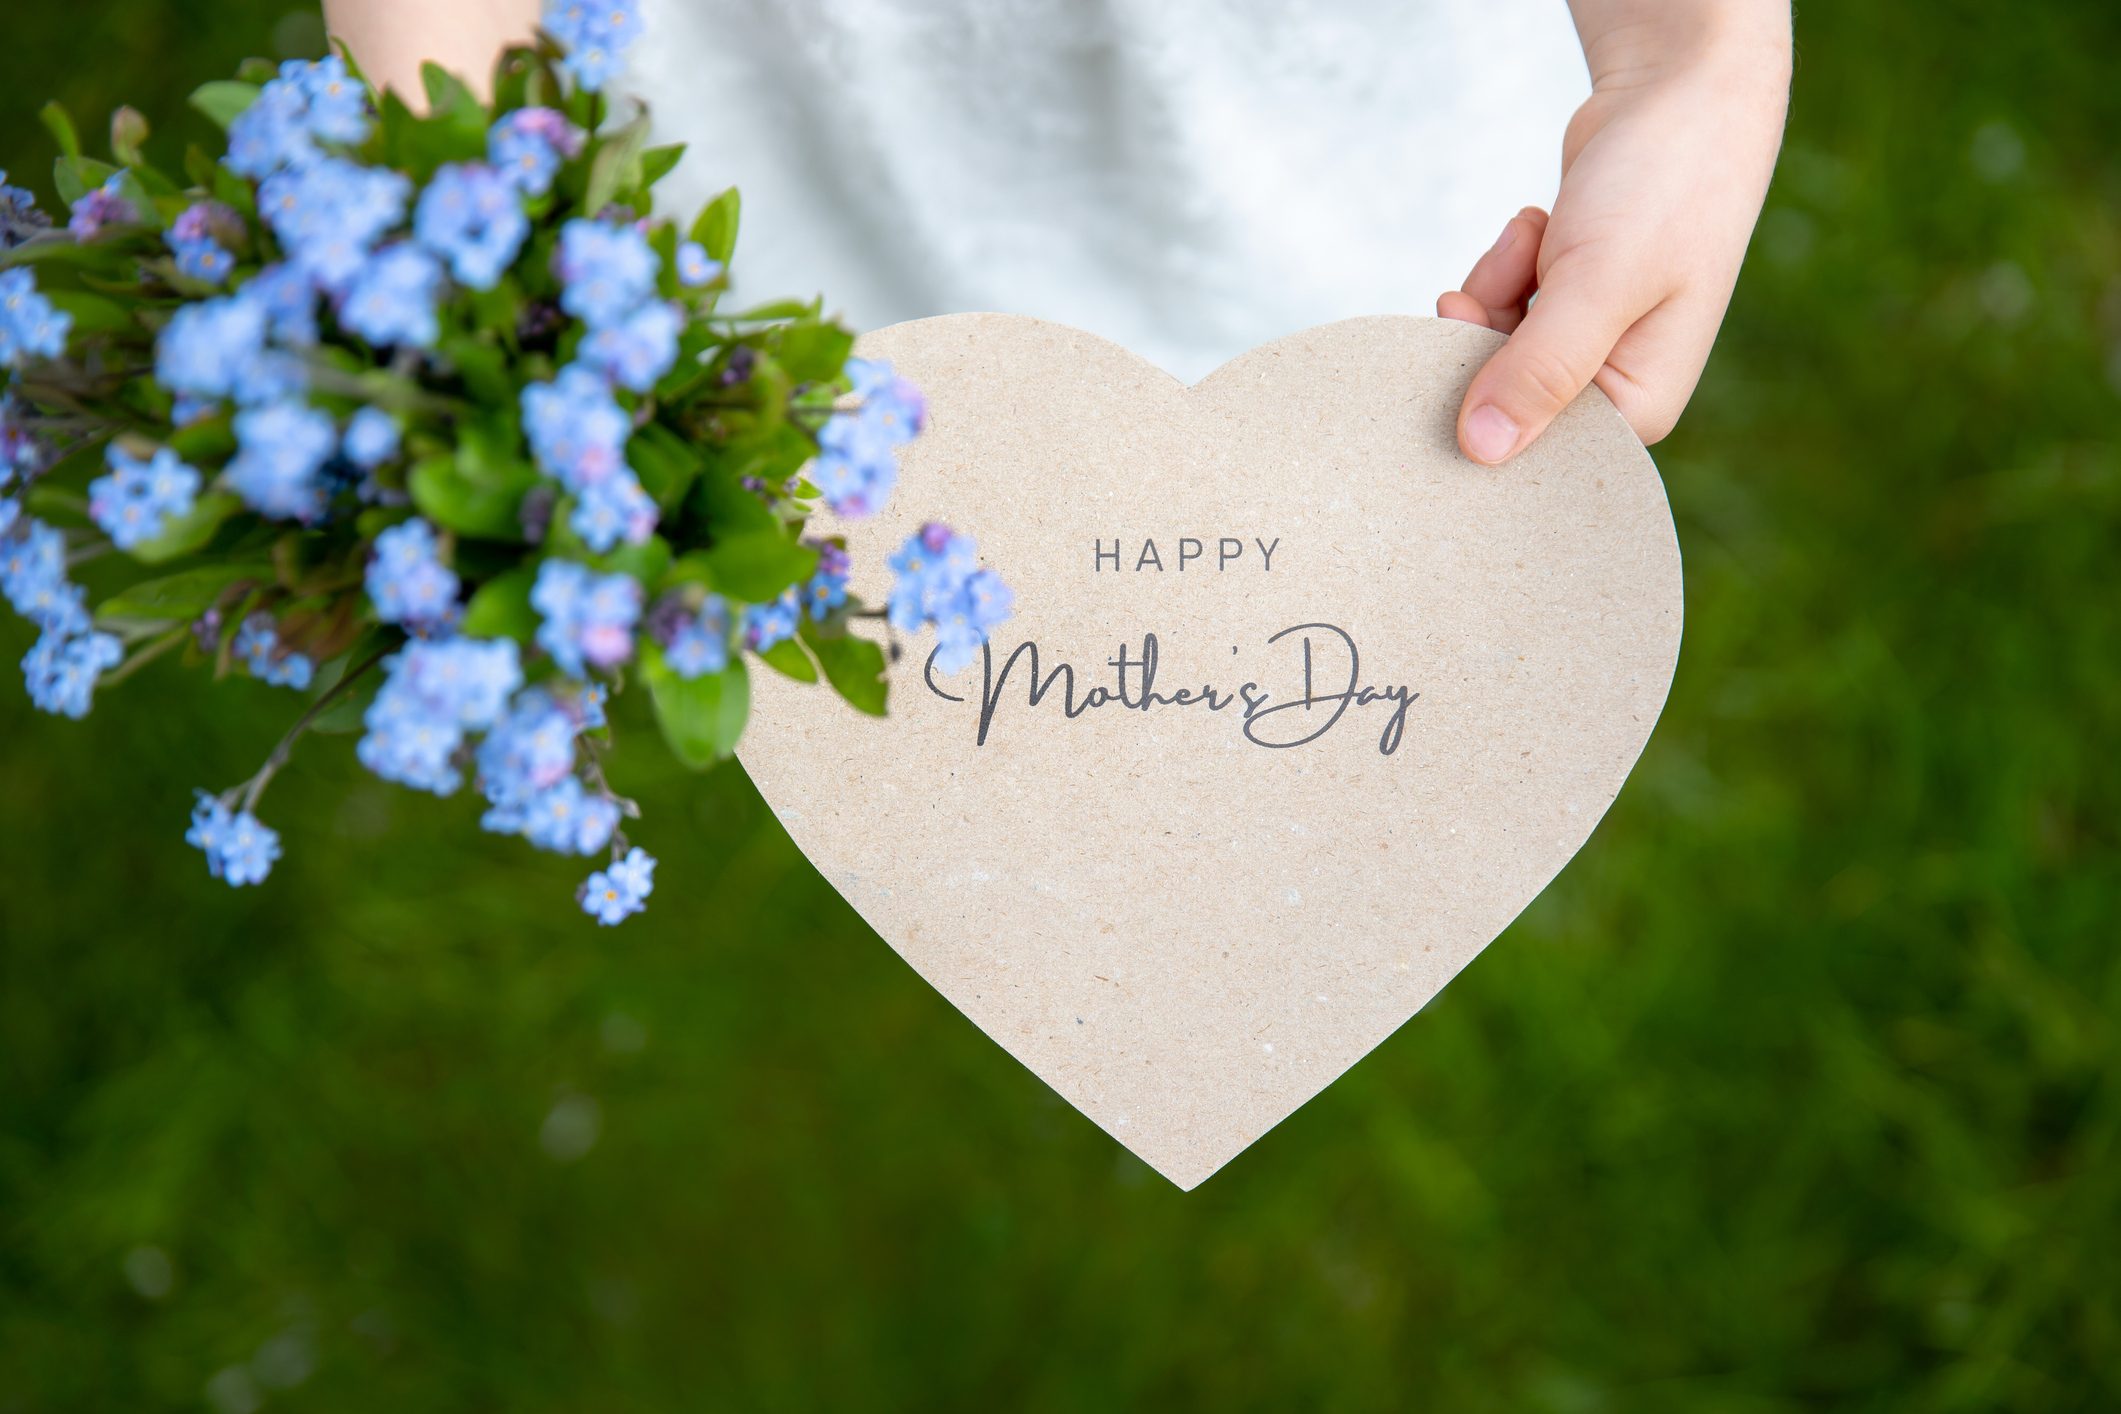 When Is Mother's Day 2023? Plus, Why Do We Celebrate Mother's Day?